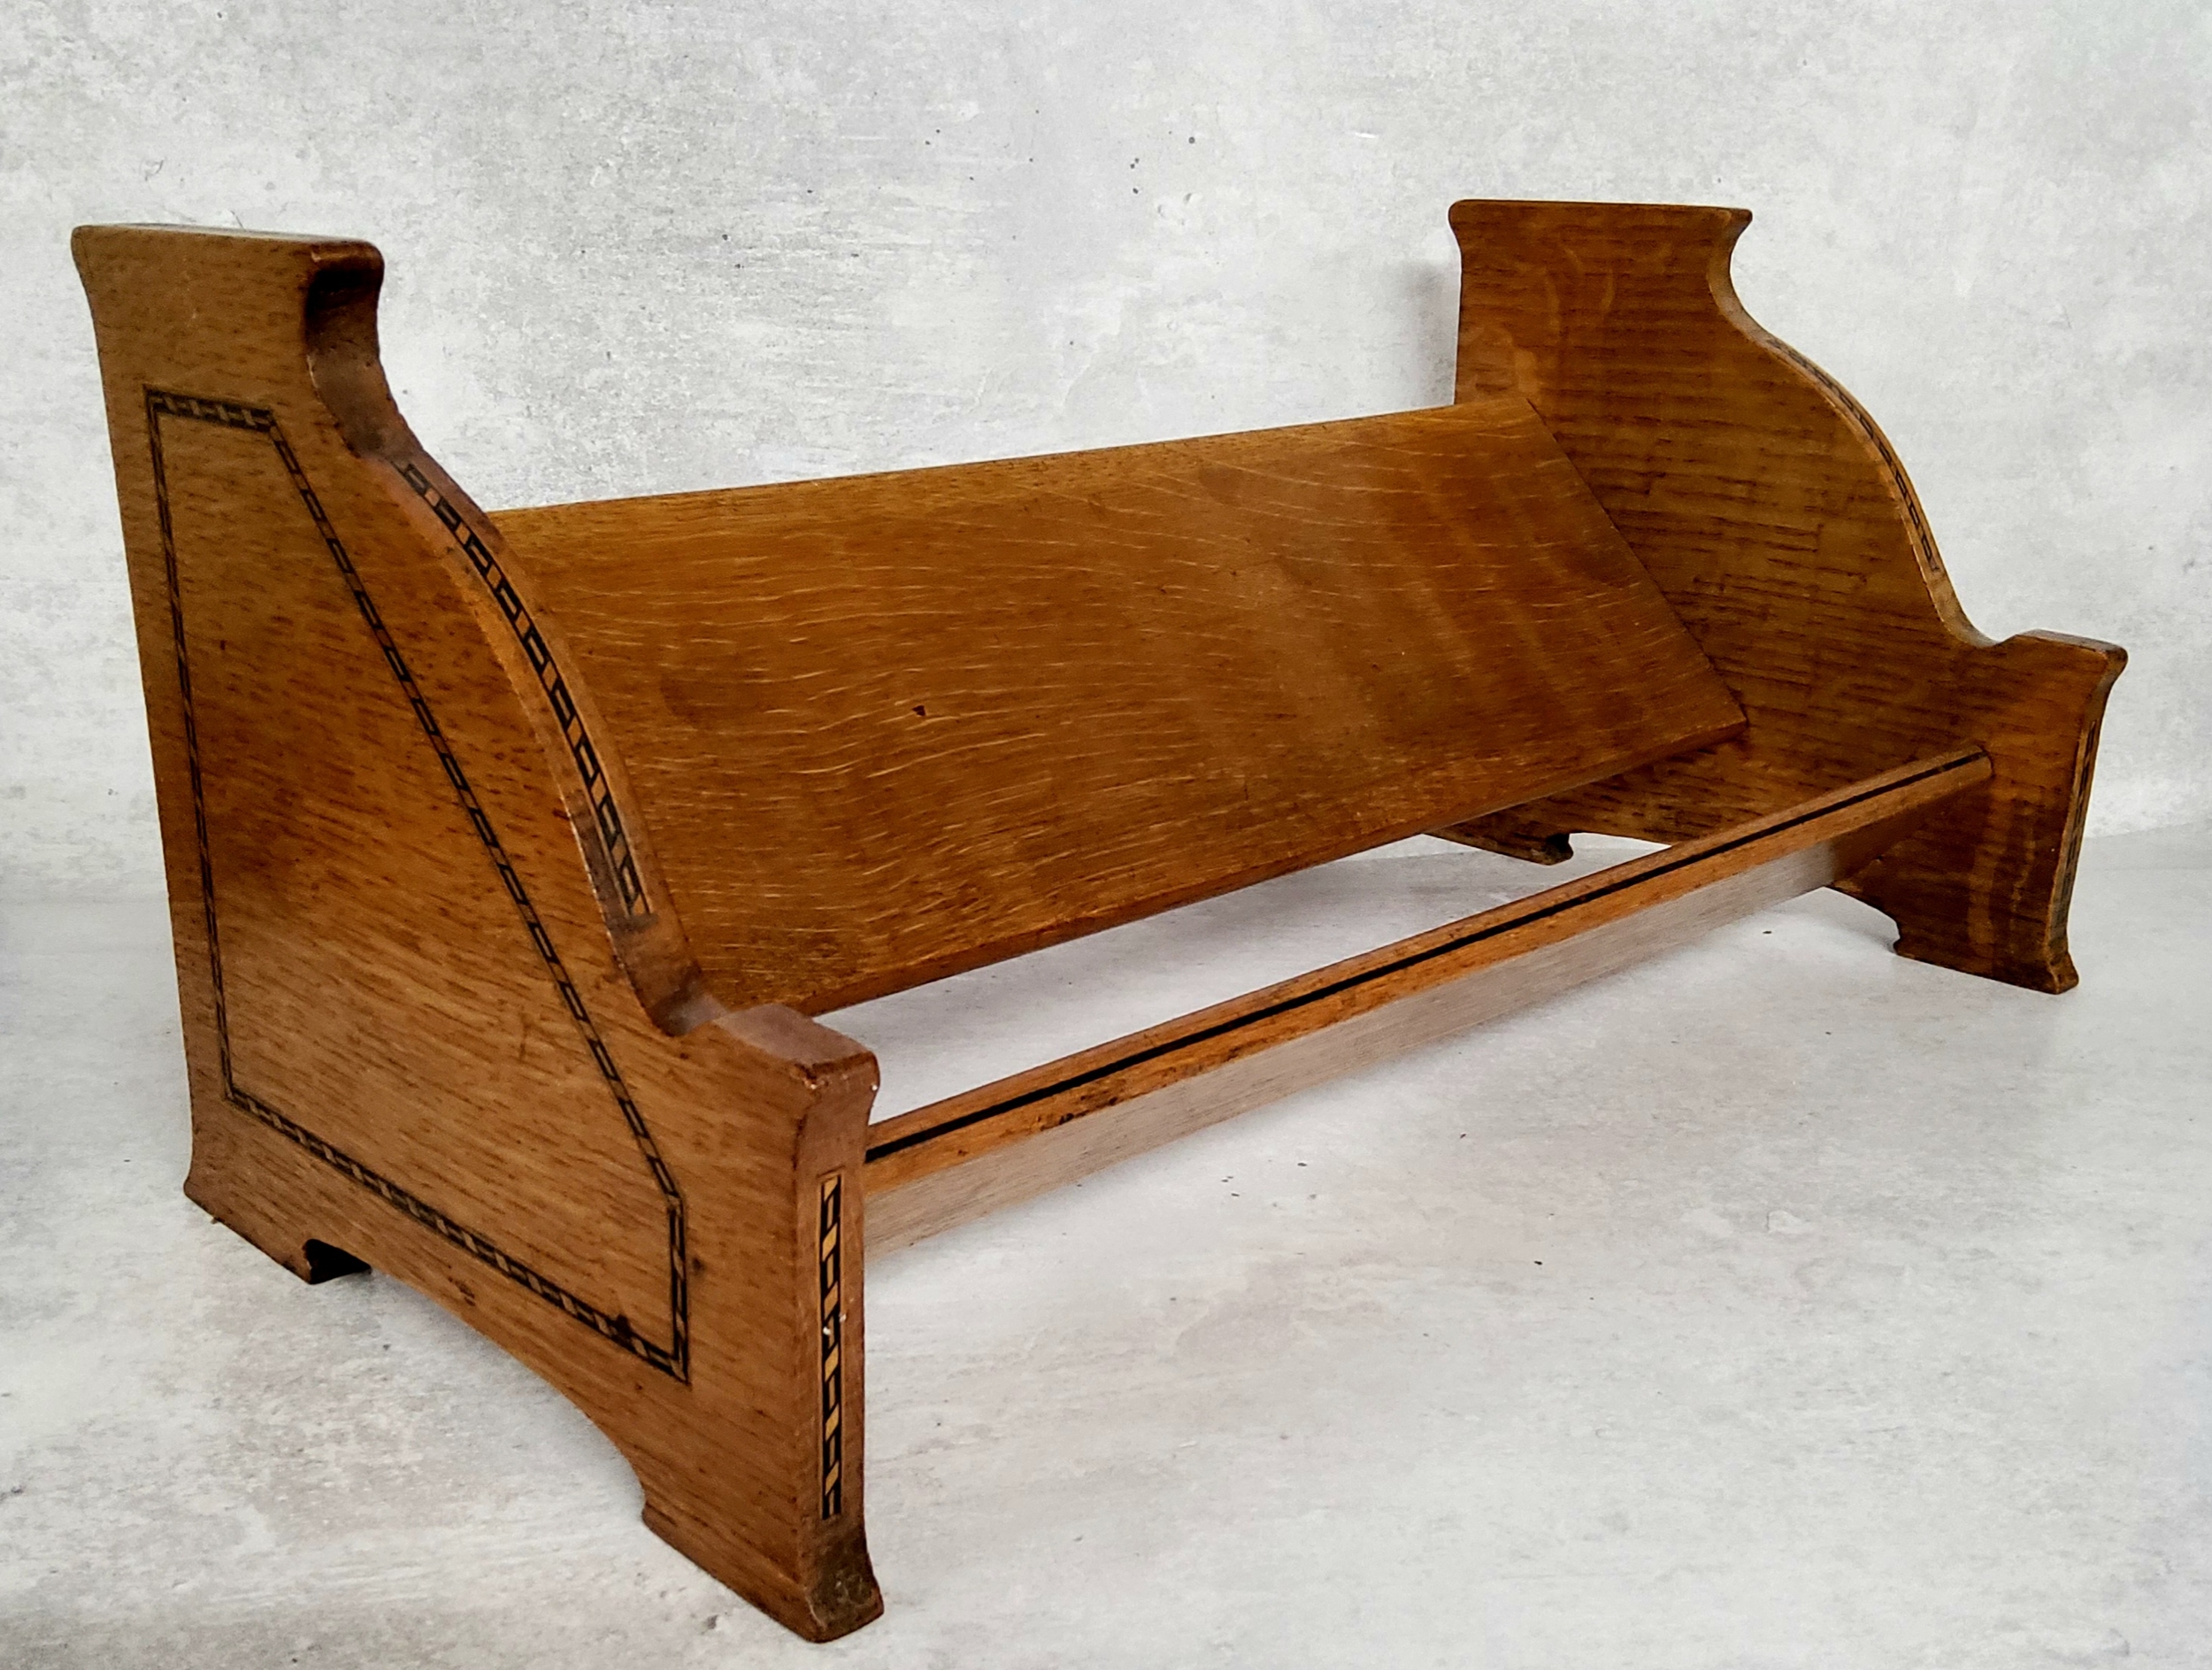 An early 20th century English oak satinwood and ebony inlaid book trough. C.1920. 46cm wide.